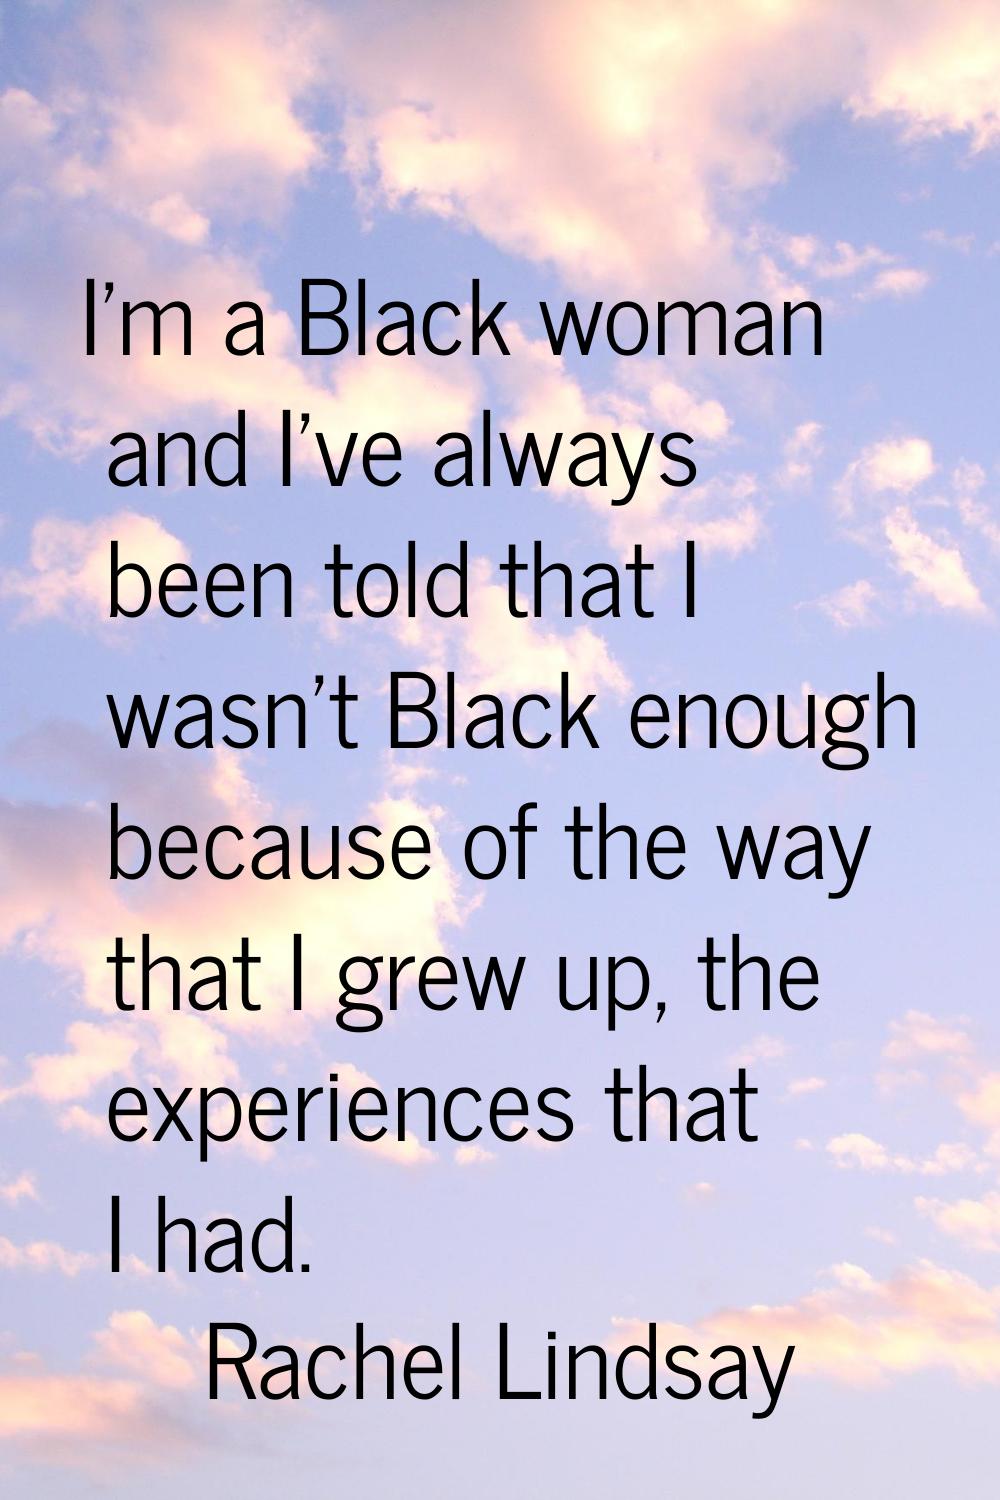 I'm a Black woman and I've always been told that I wasn't Black enough because of the way that I gr